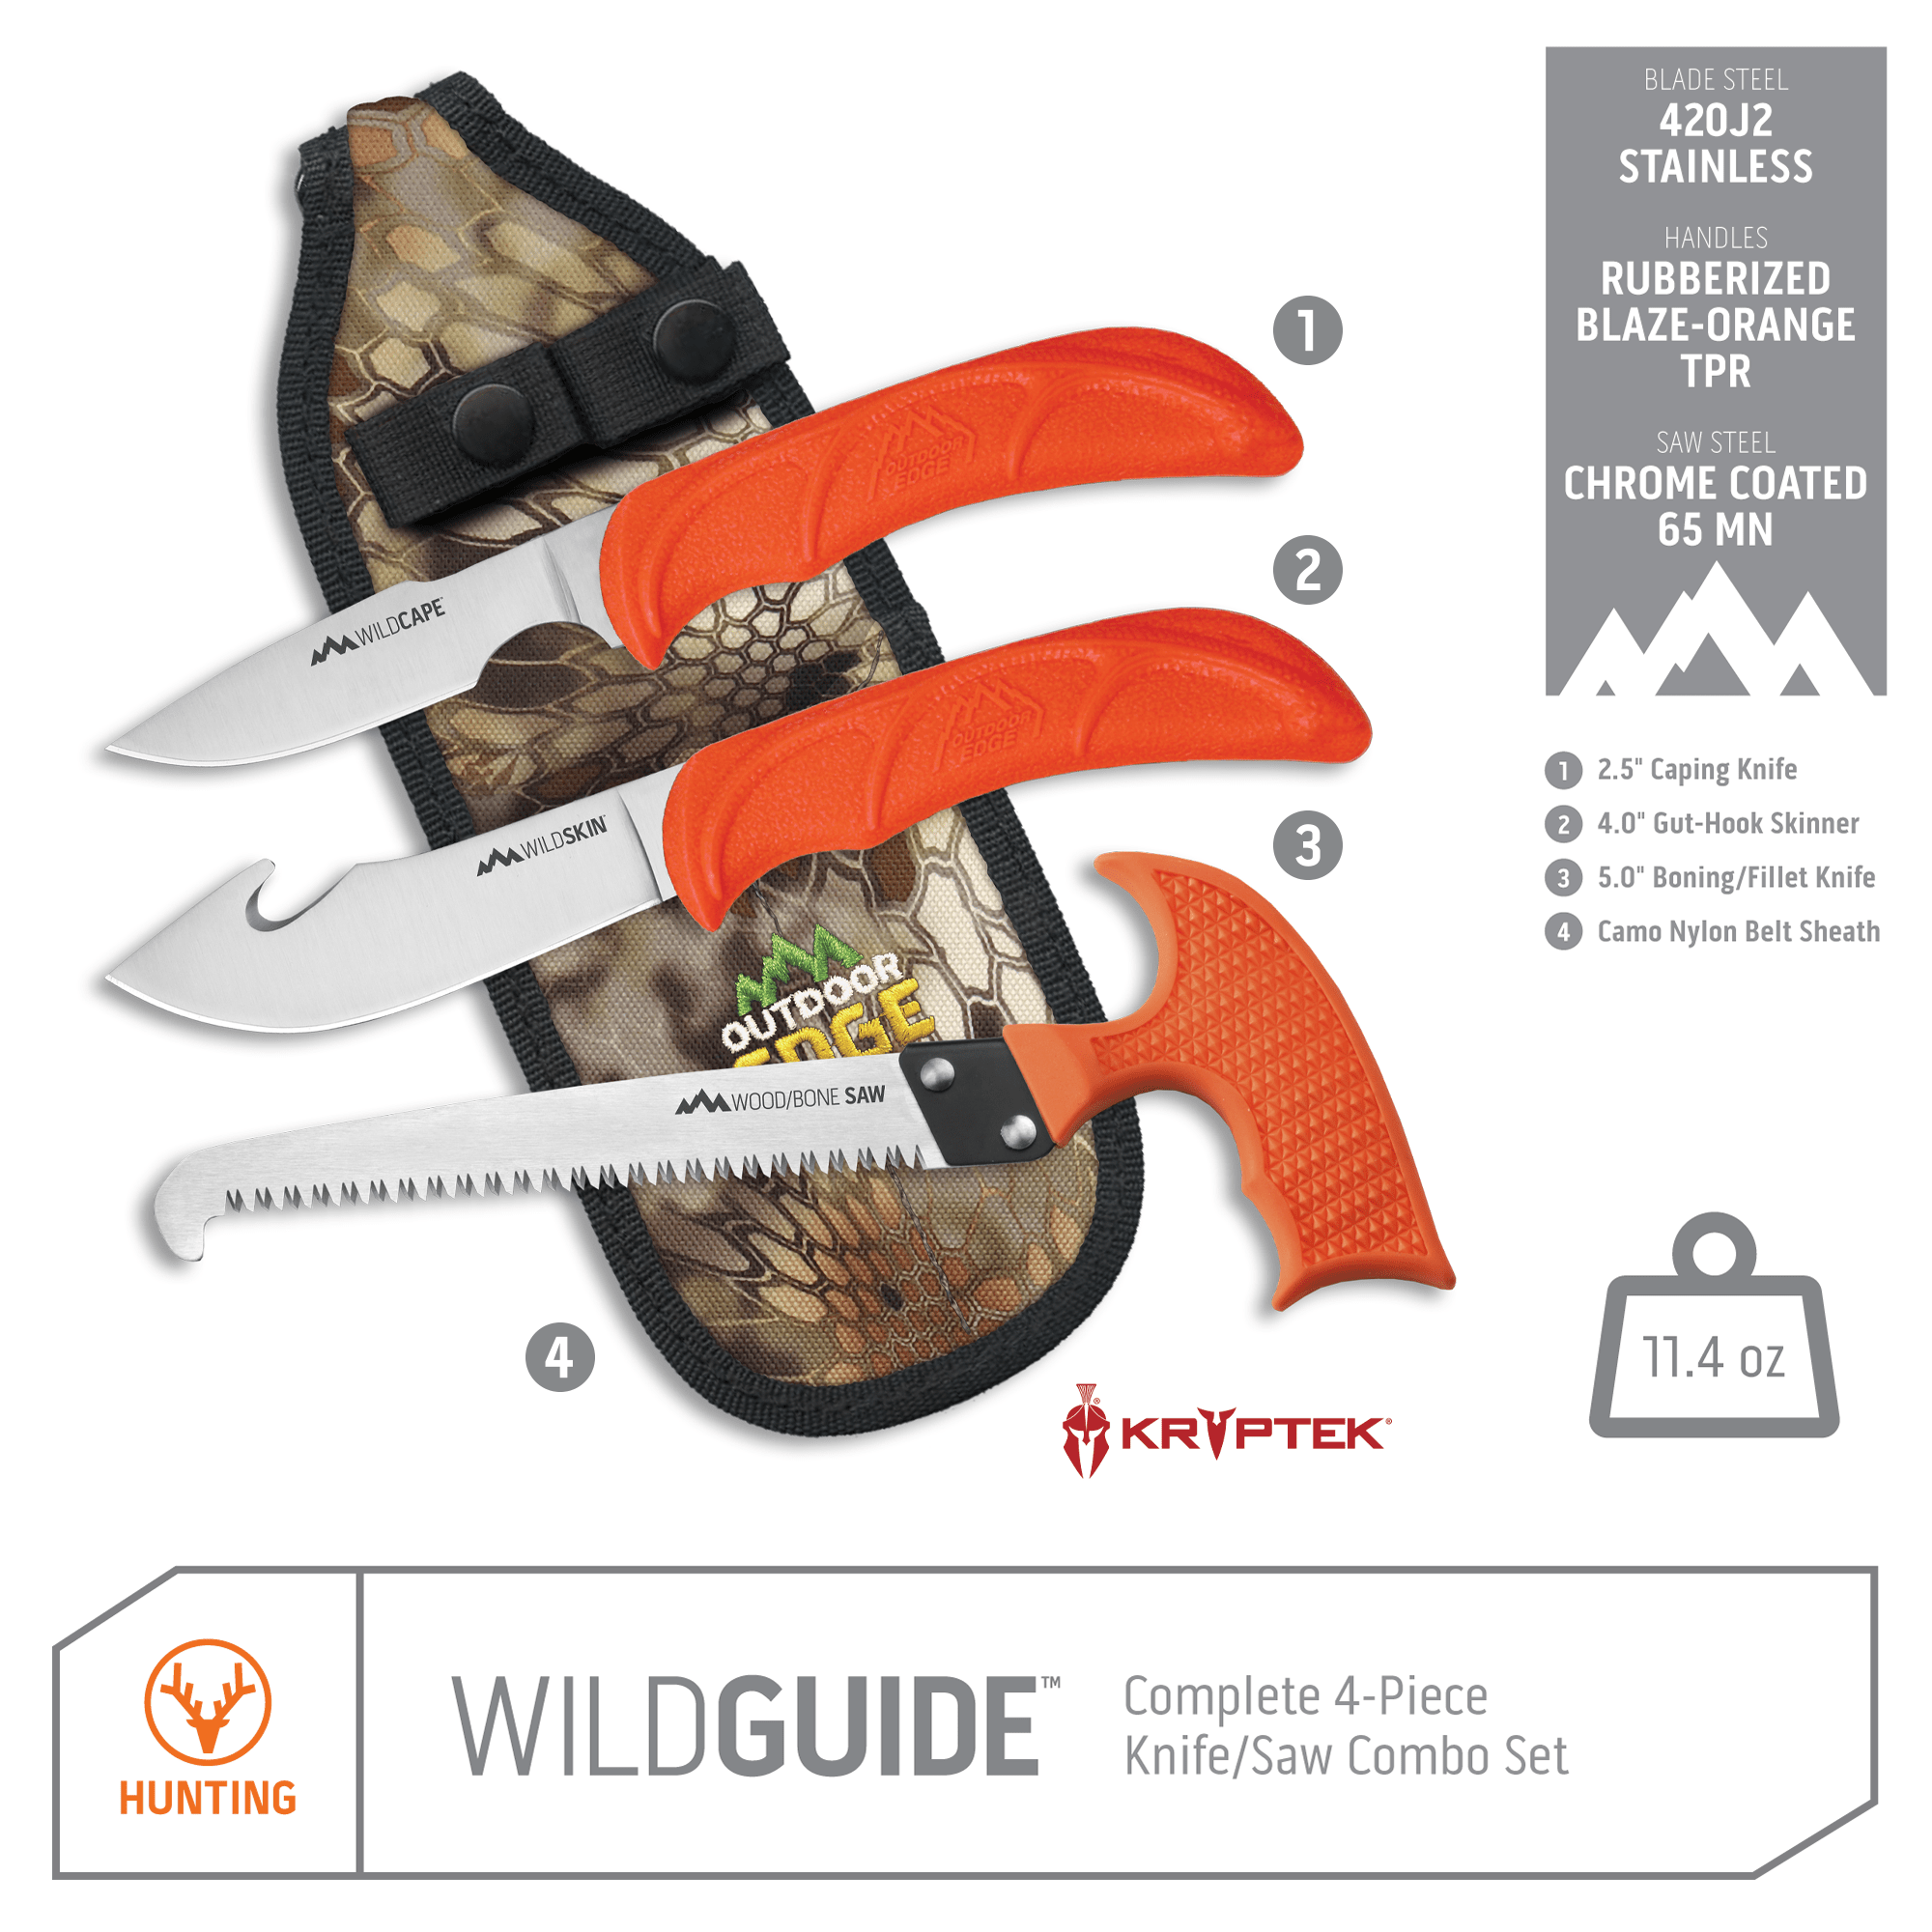 Outdoor Edge WildGuide Hunting Knife Set Product Photo showing caping knife, gut-hook skinner, and wood/bone saw with callouts for each knife.